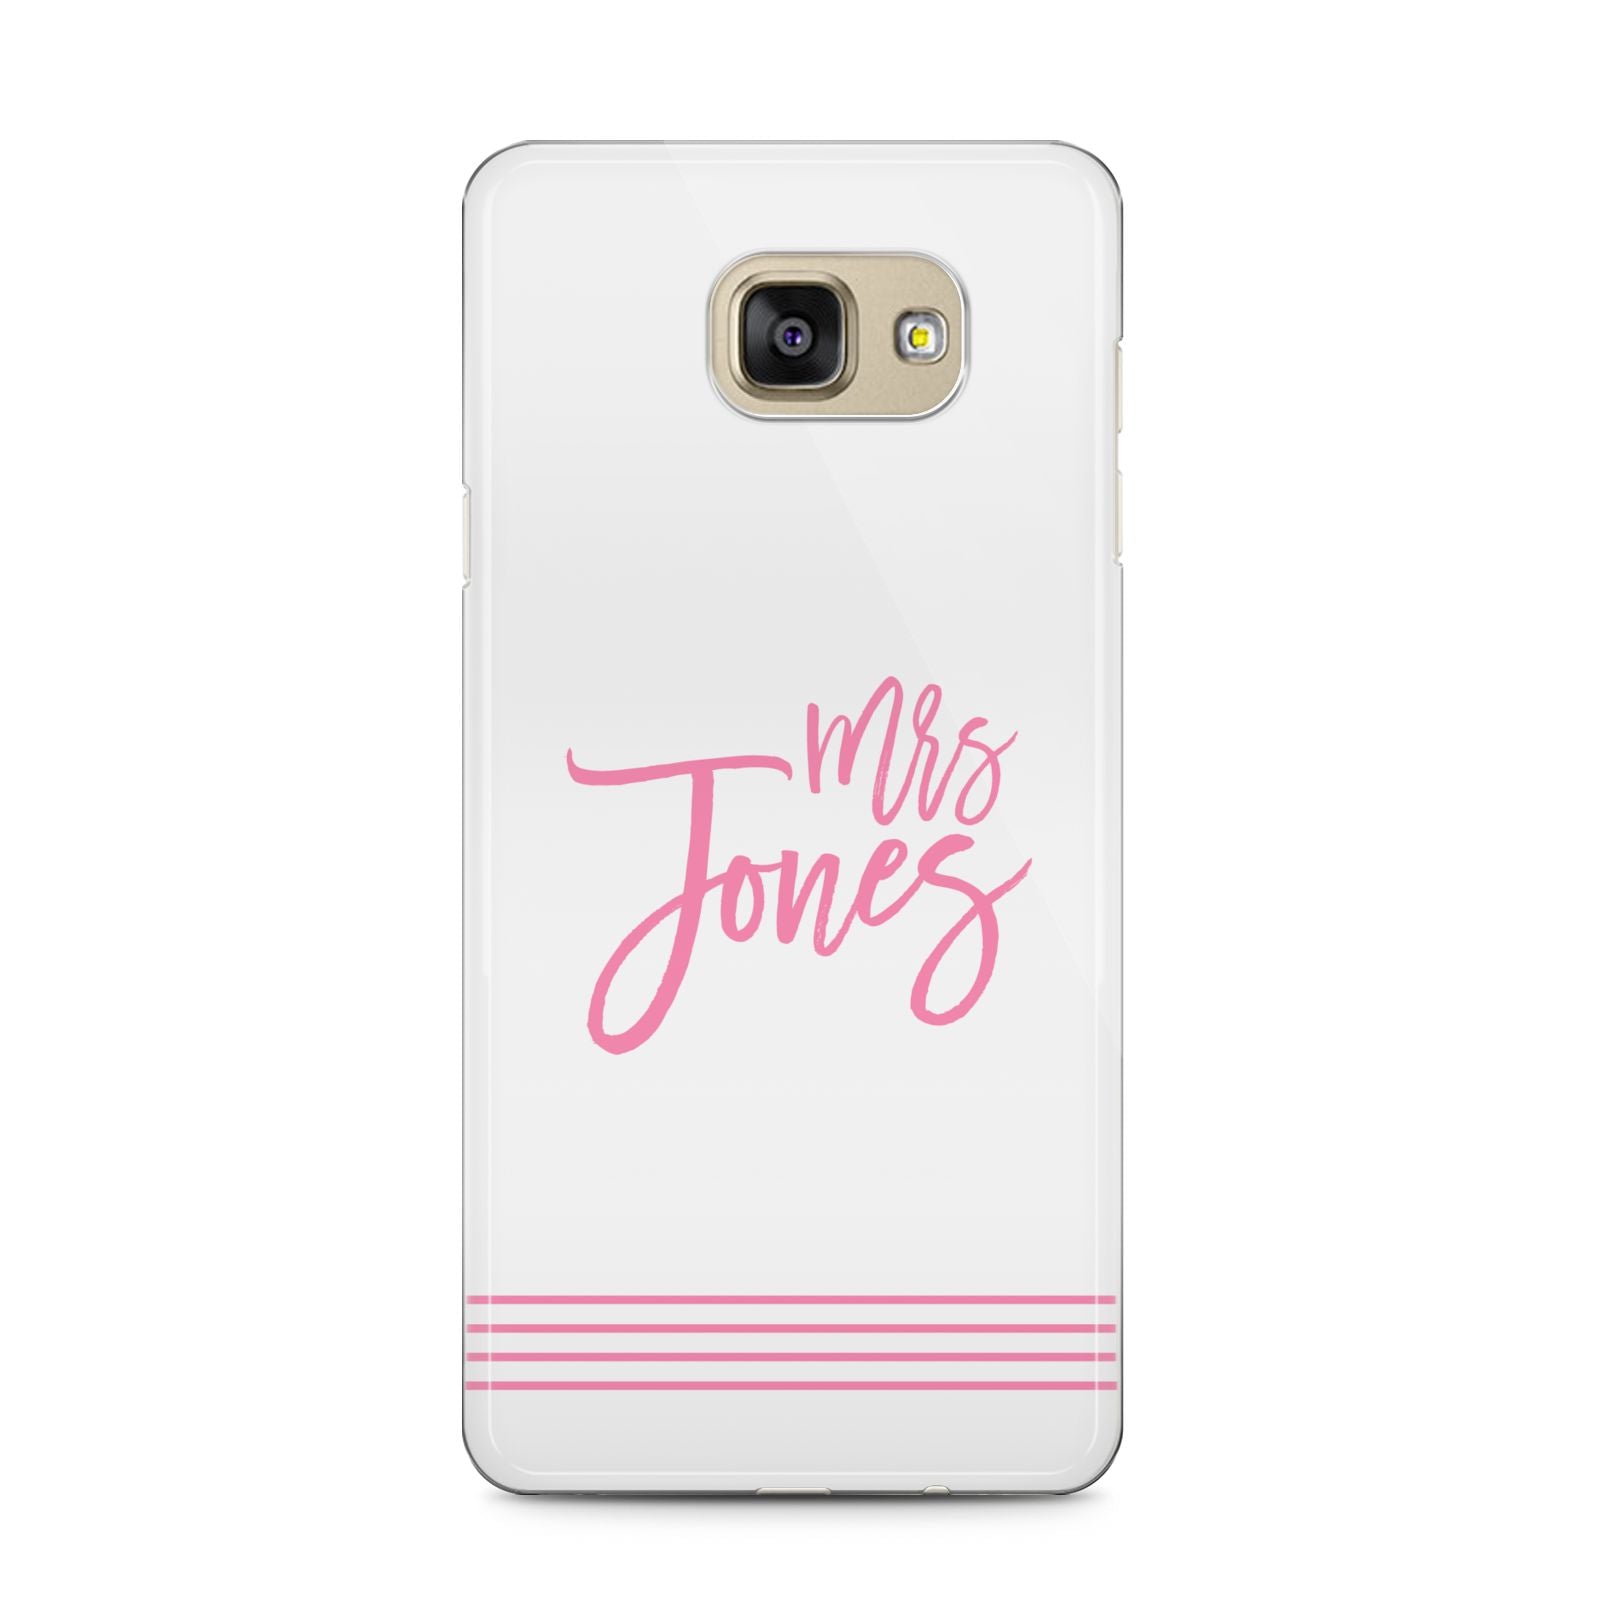 Personalised Hers Samsung Galaxy A5 2016 Case on gold phone